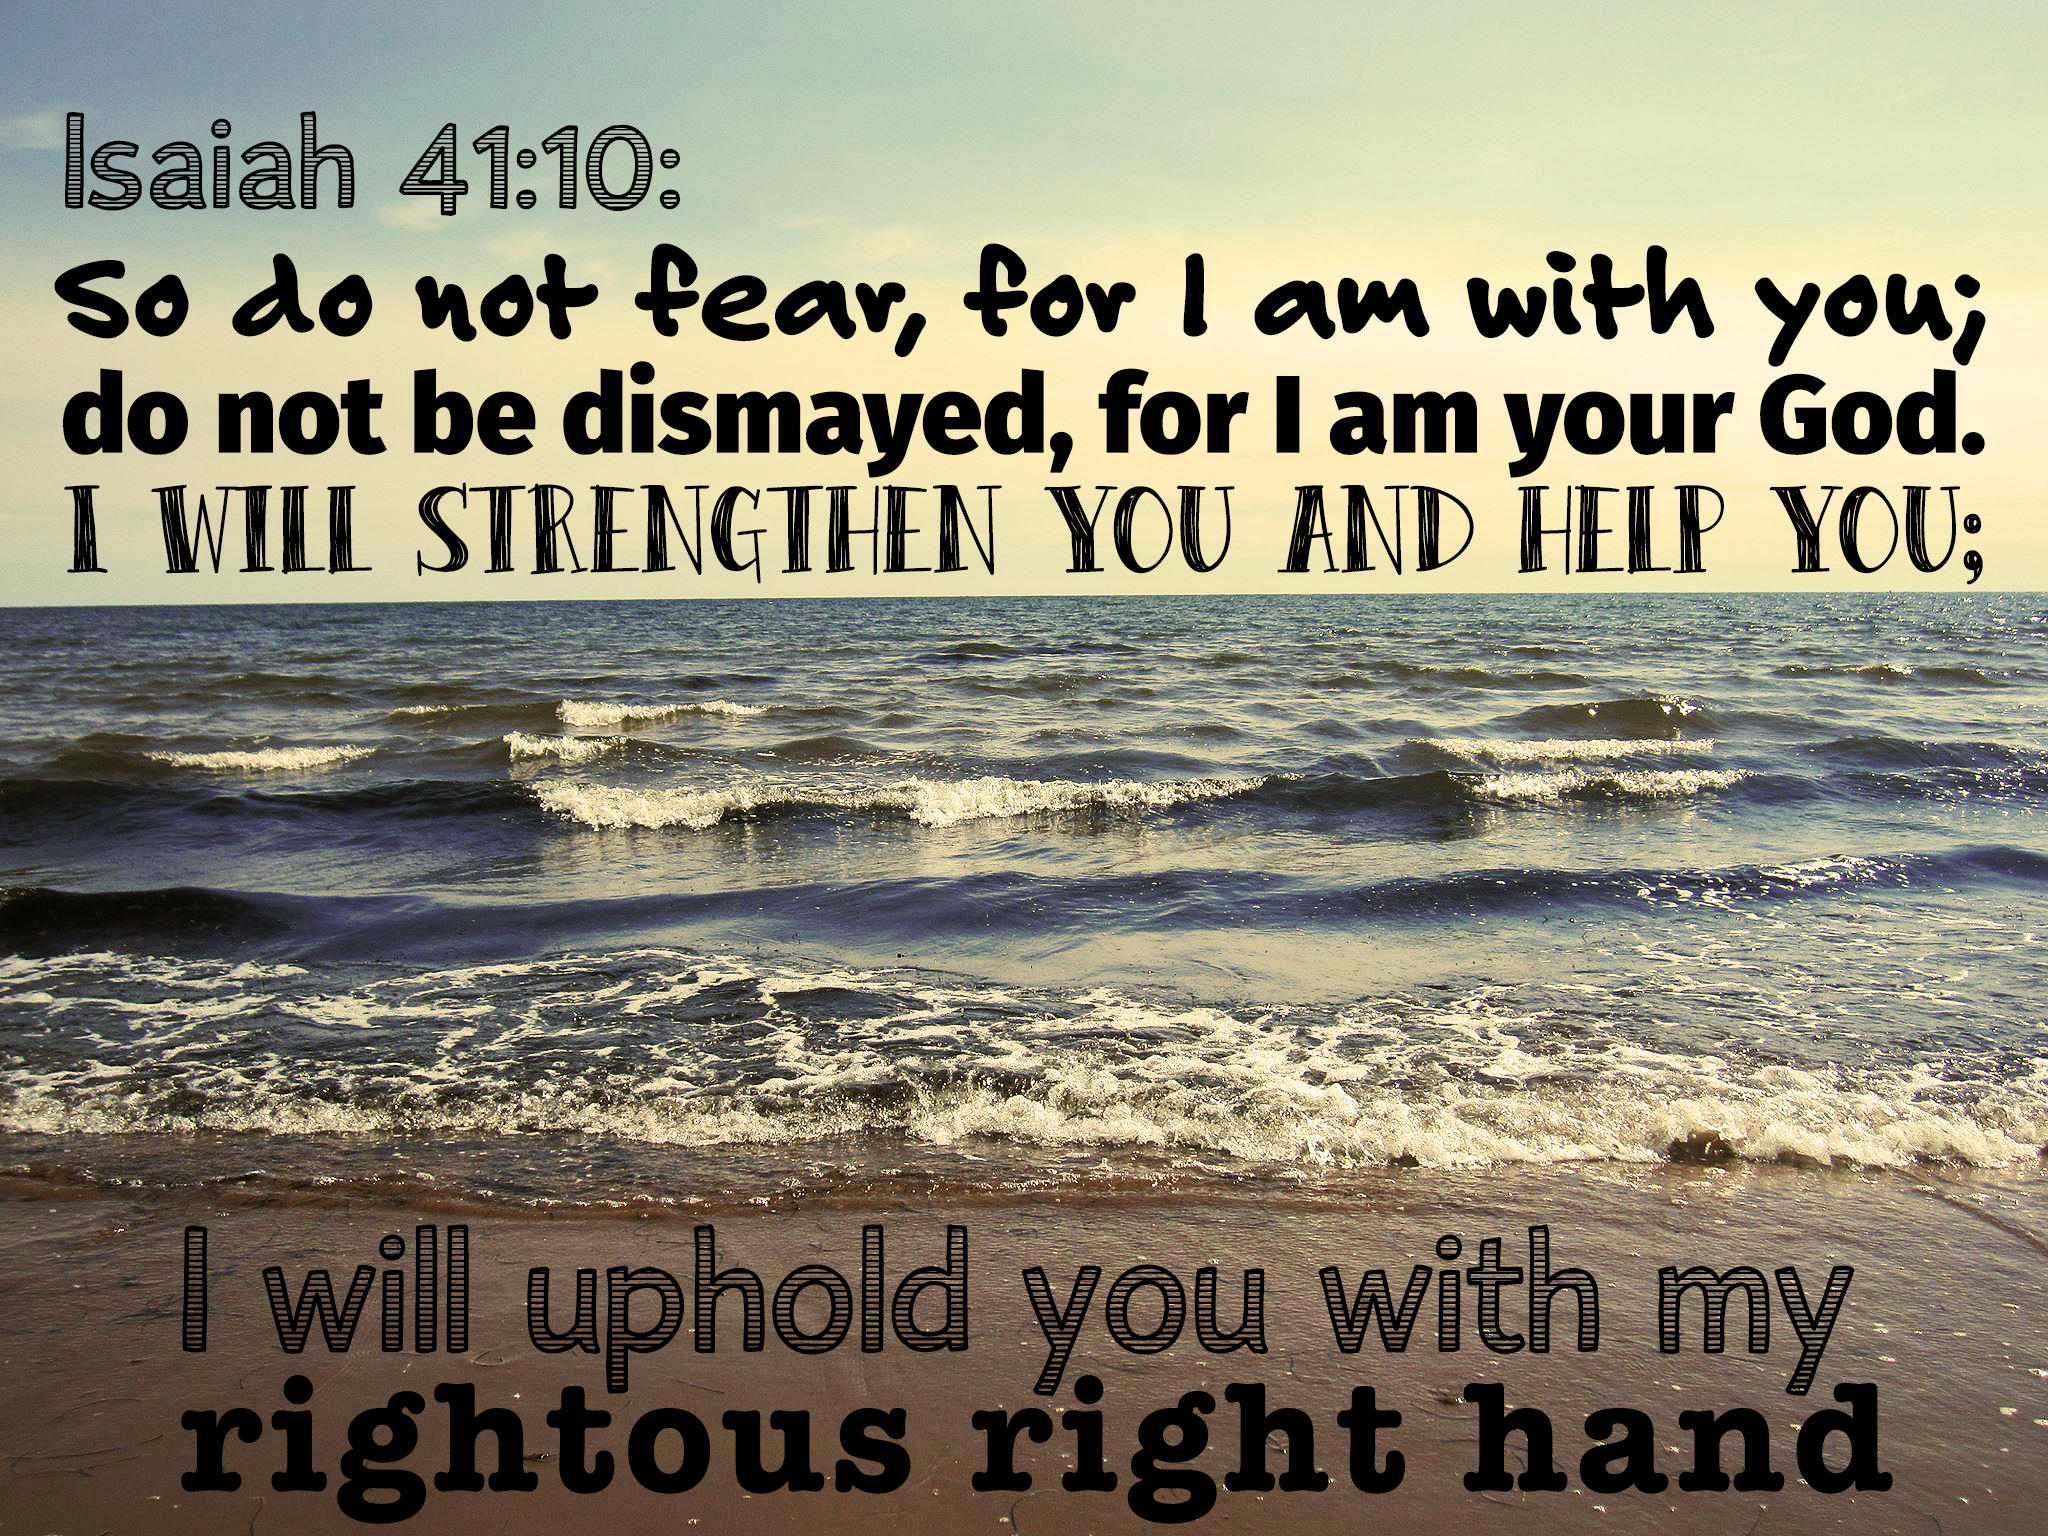 Isaiah 41:10 God Is With You And He Promises To Always Be With You